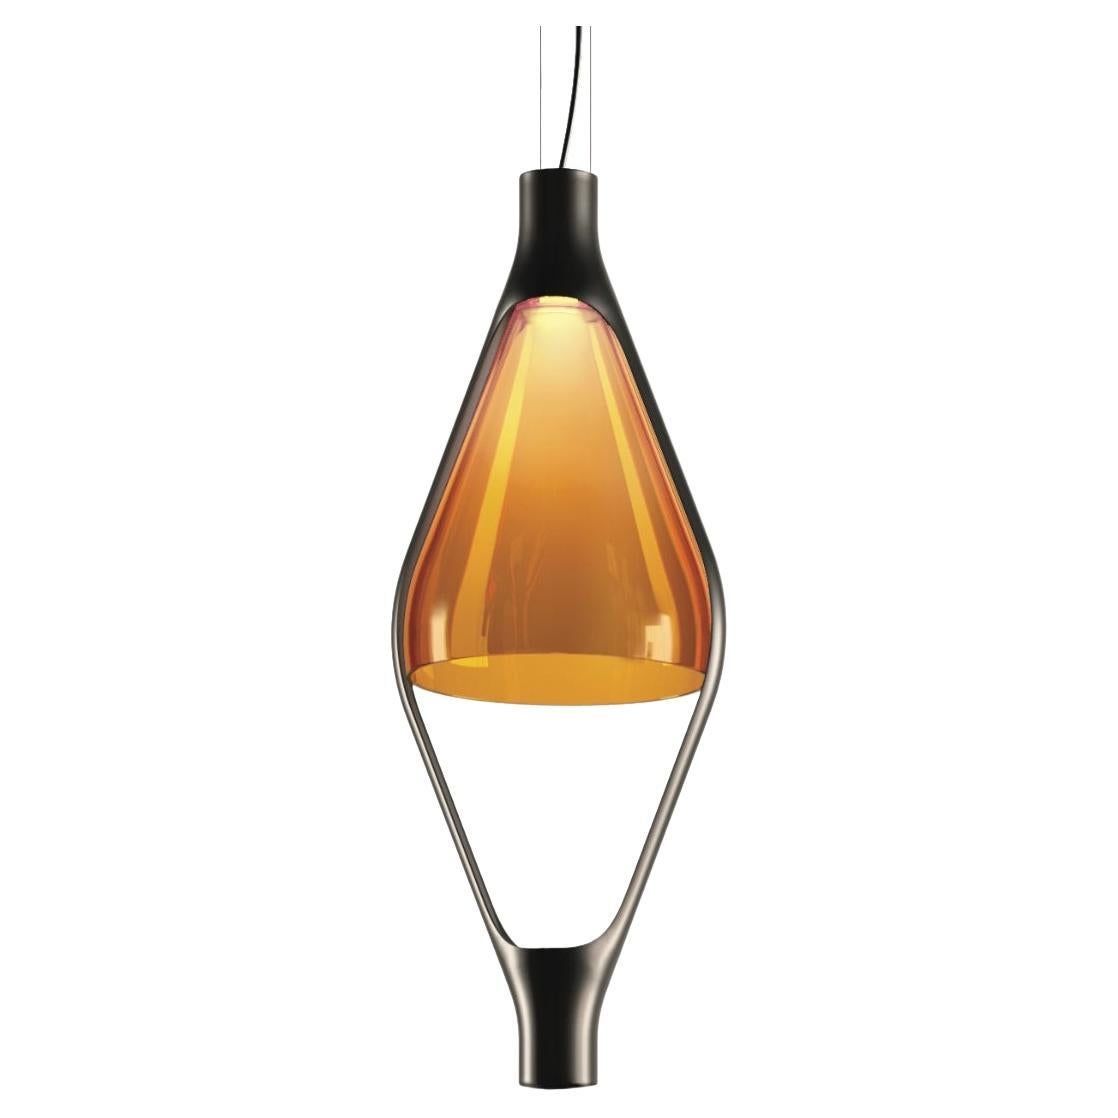 'Viceversa 2' Modular Suspension Lamp by Noé Lawrance for Kdln in Amber For Sale 1